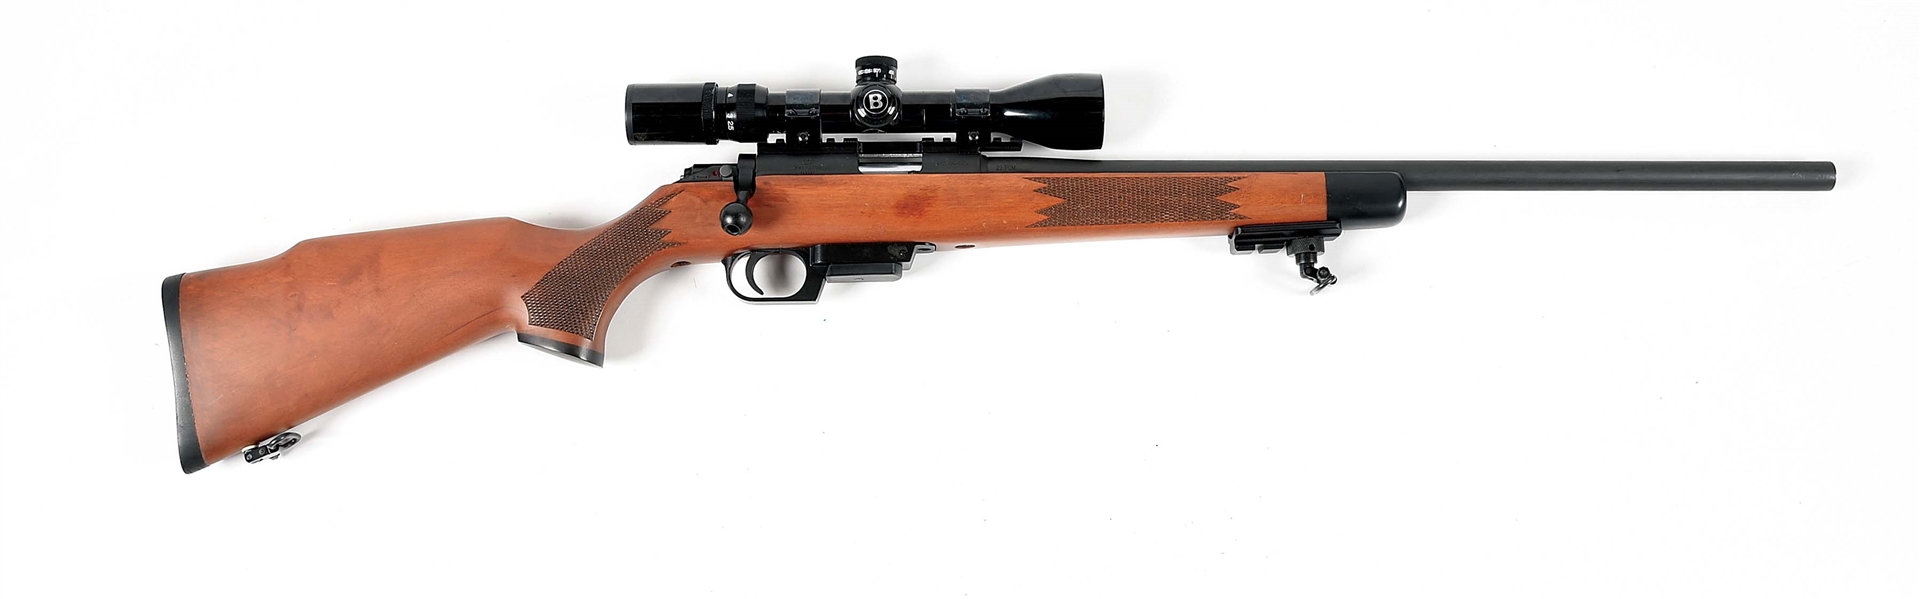 (M) ROCK ISLAND ARMORY M22 BOLT ACTION RIFLE WITH SCOPE.